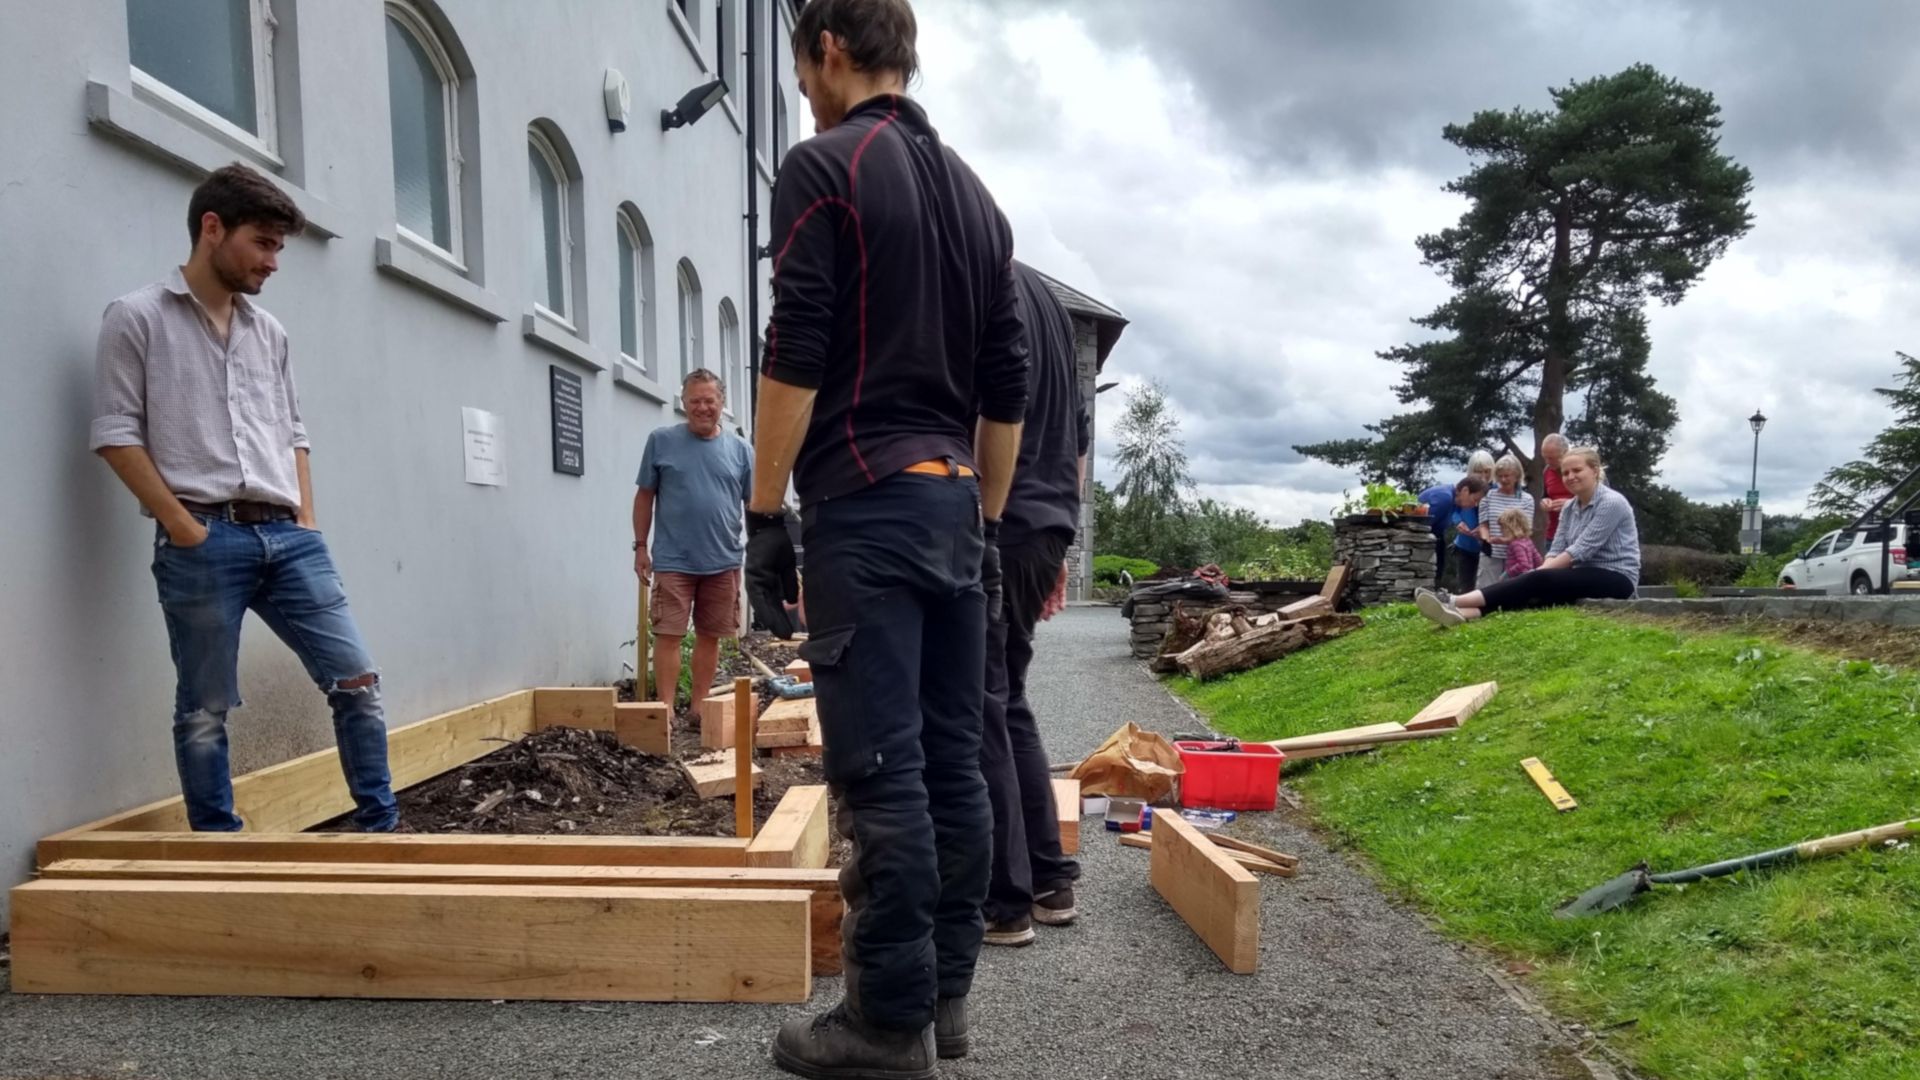 People building planters for community vegetable growing in Ambleside